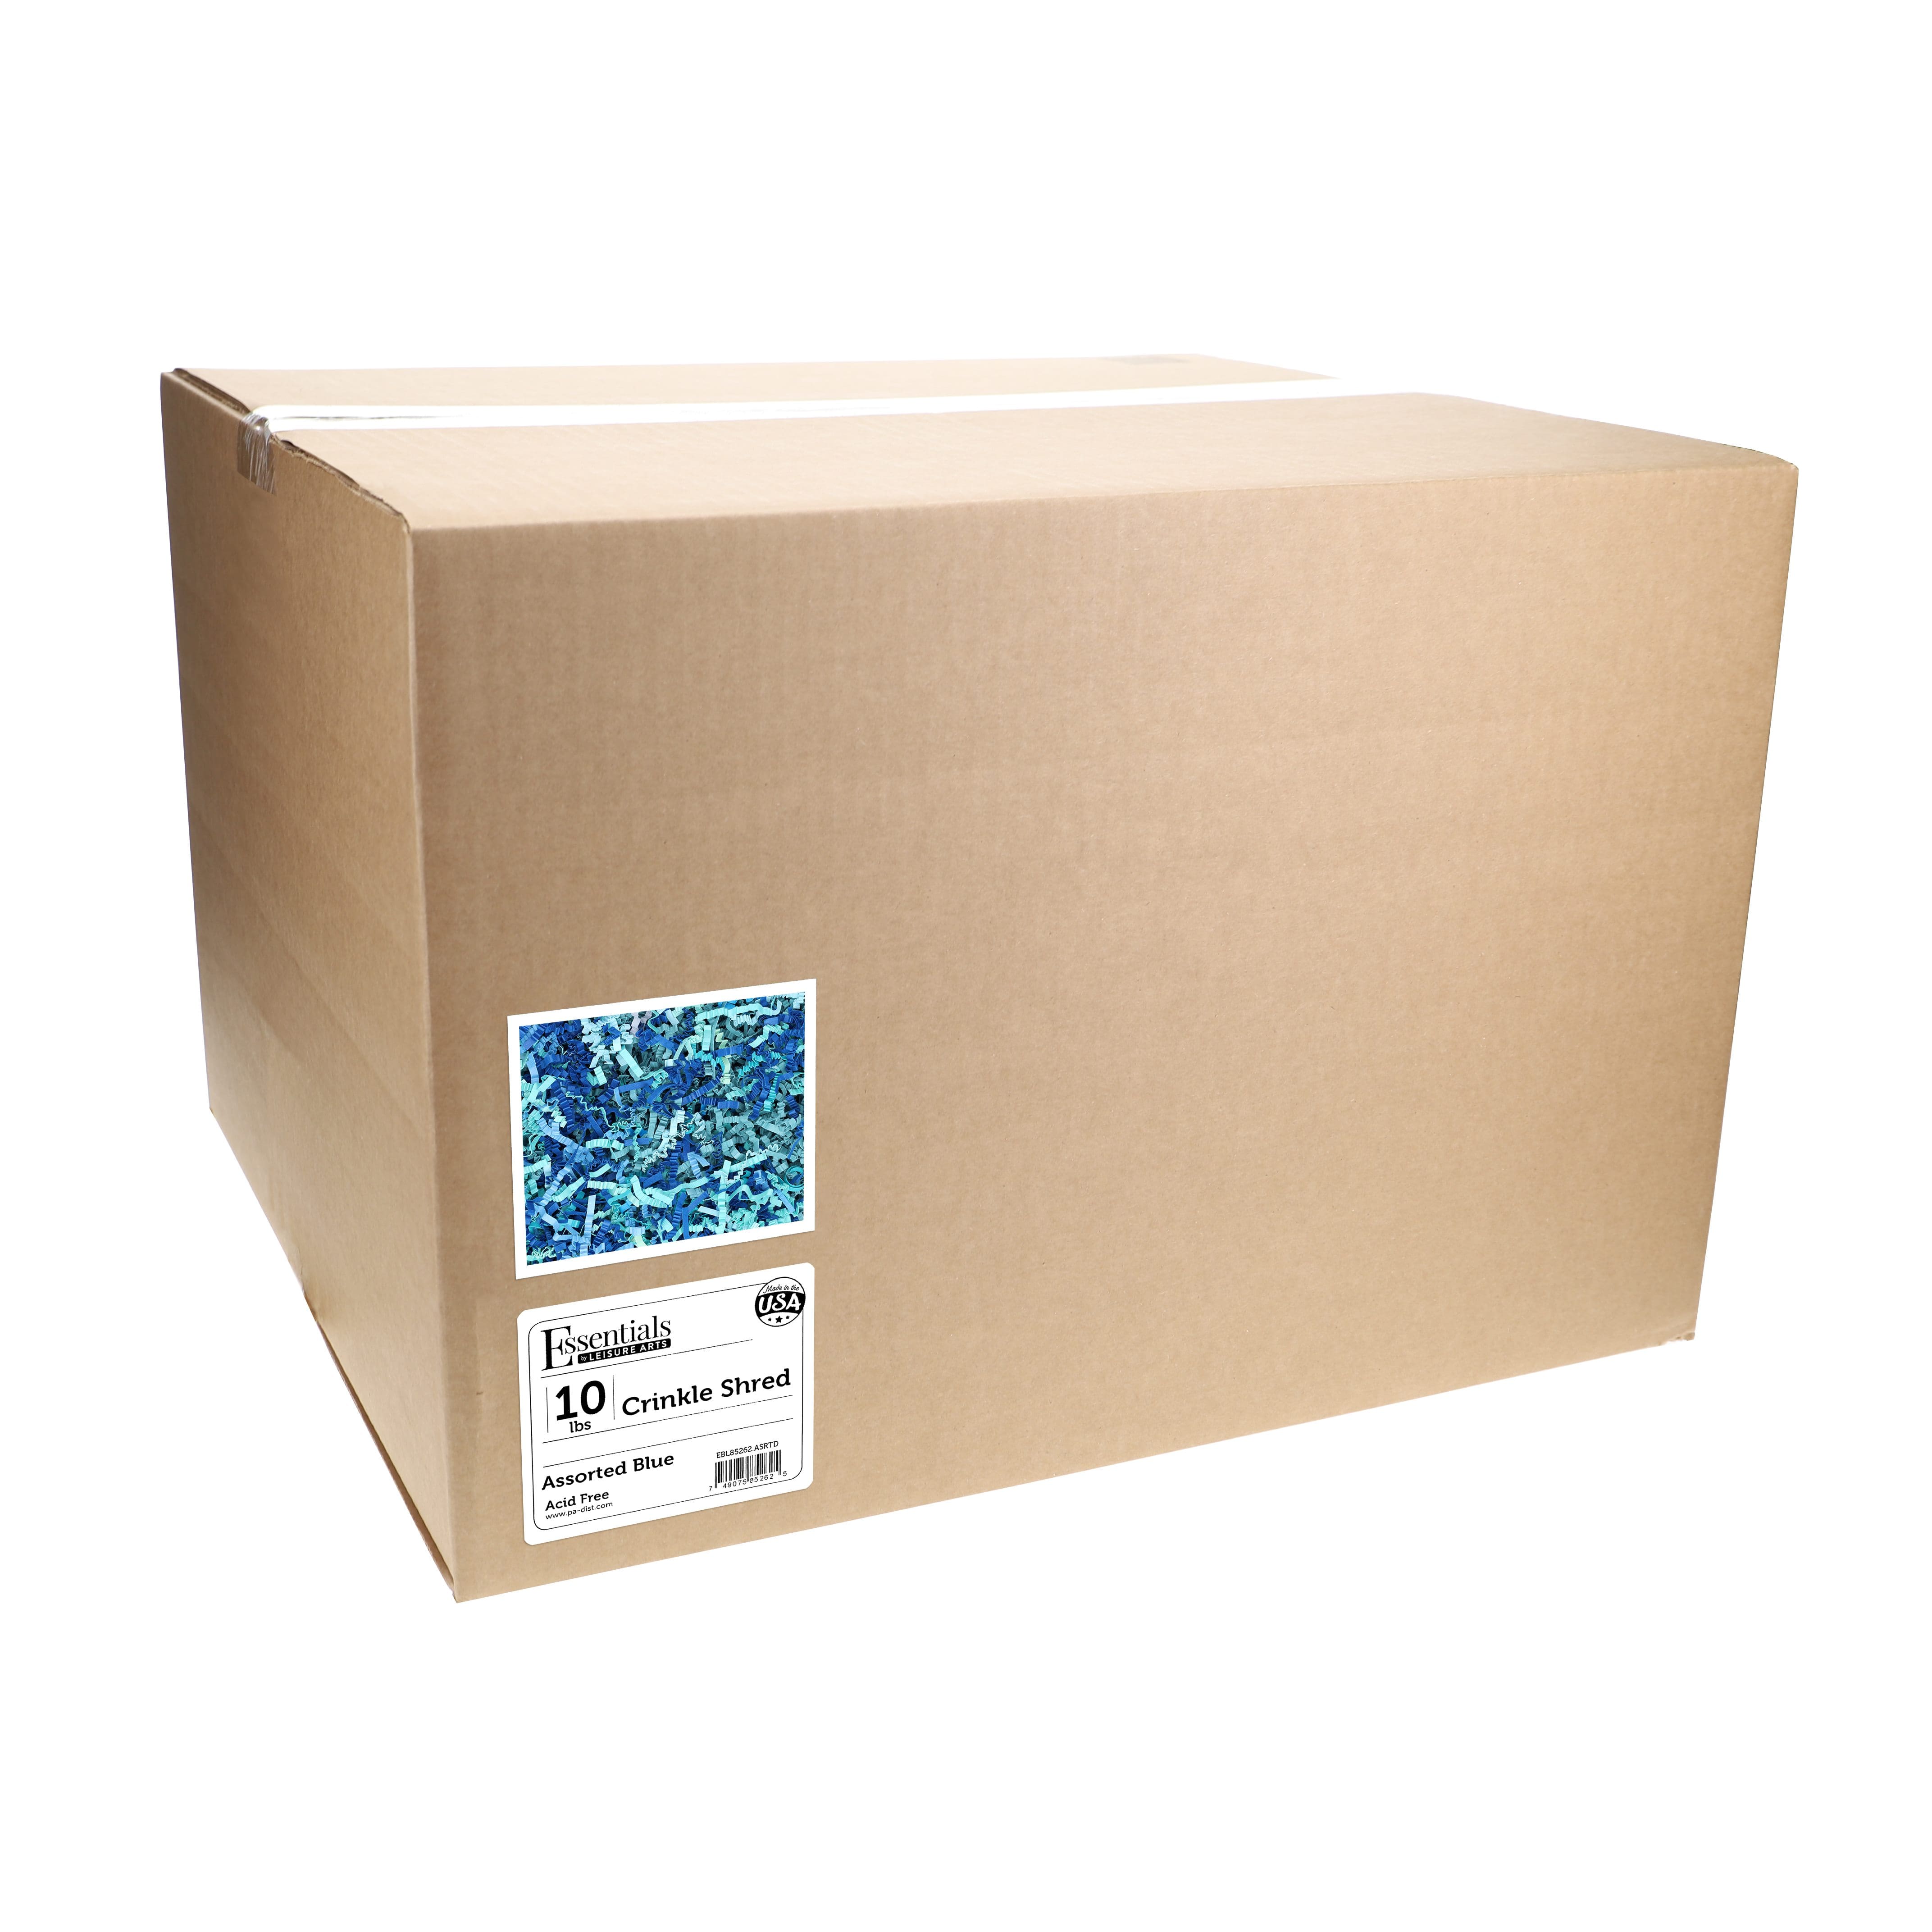 Essentials by Leisure Arts Crinkle Shred Box, 10lb.